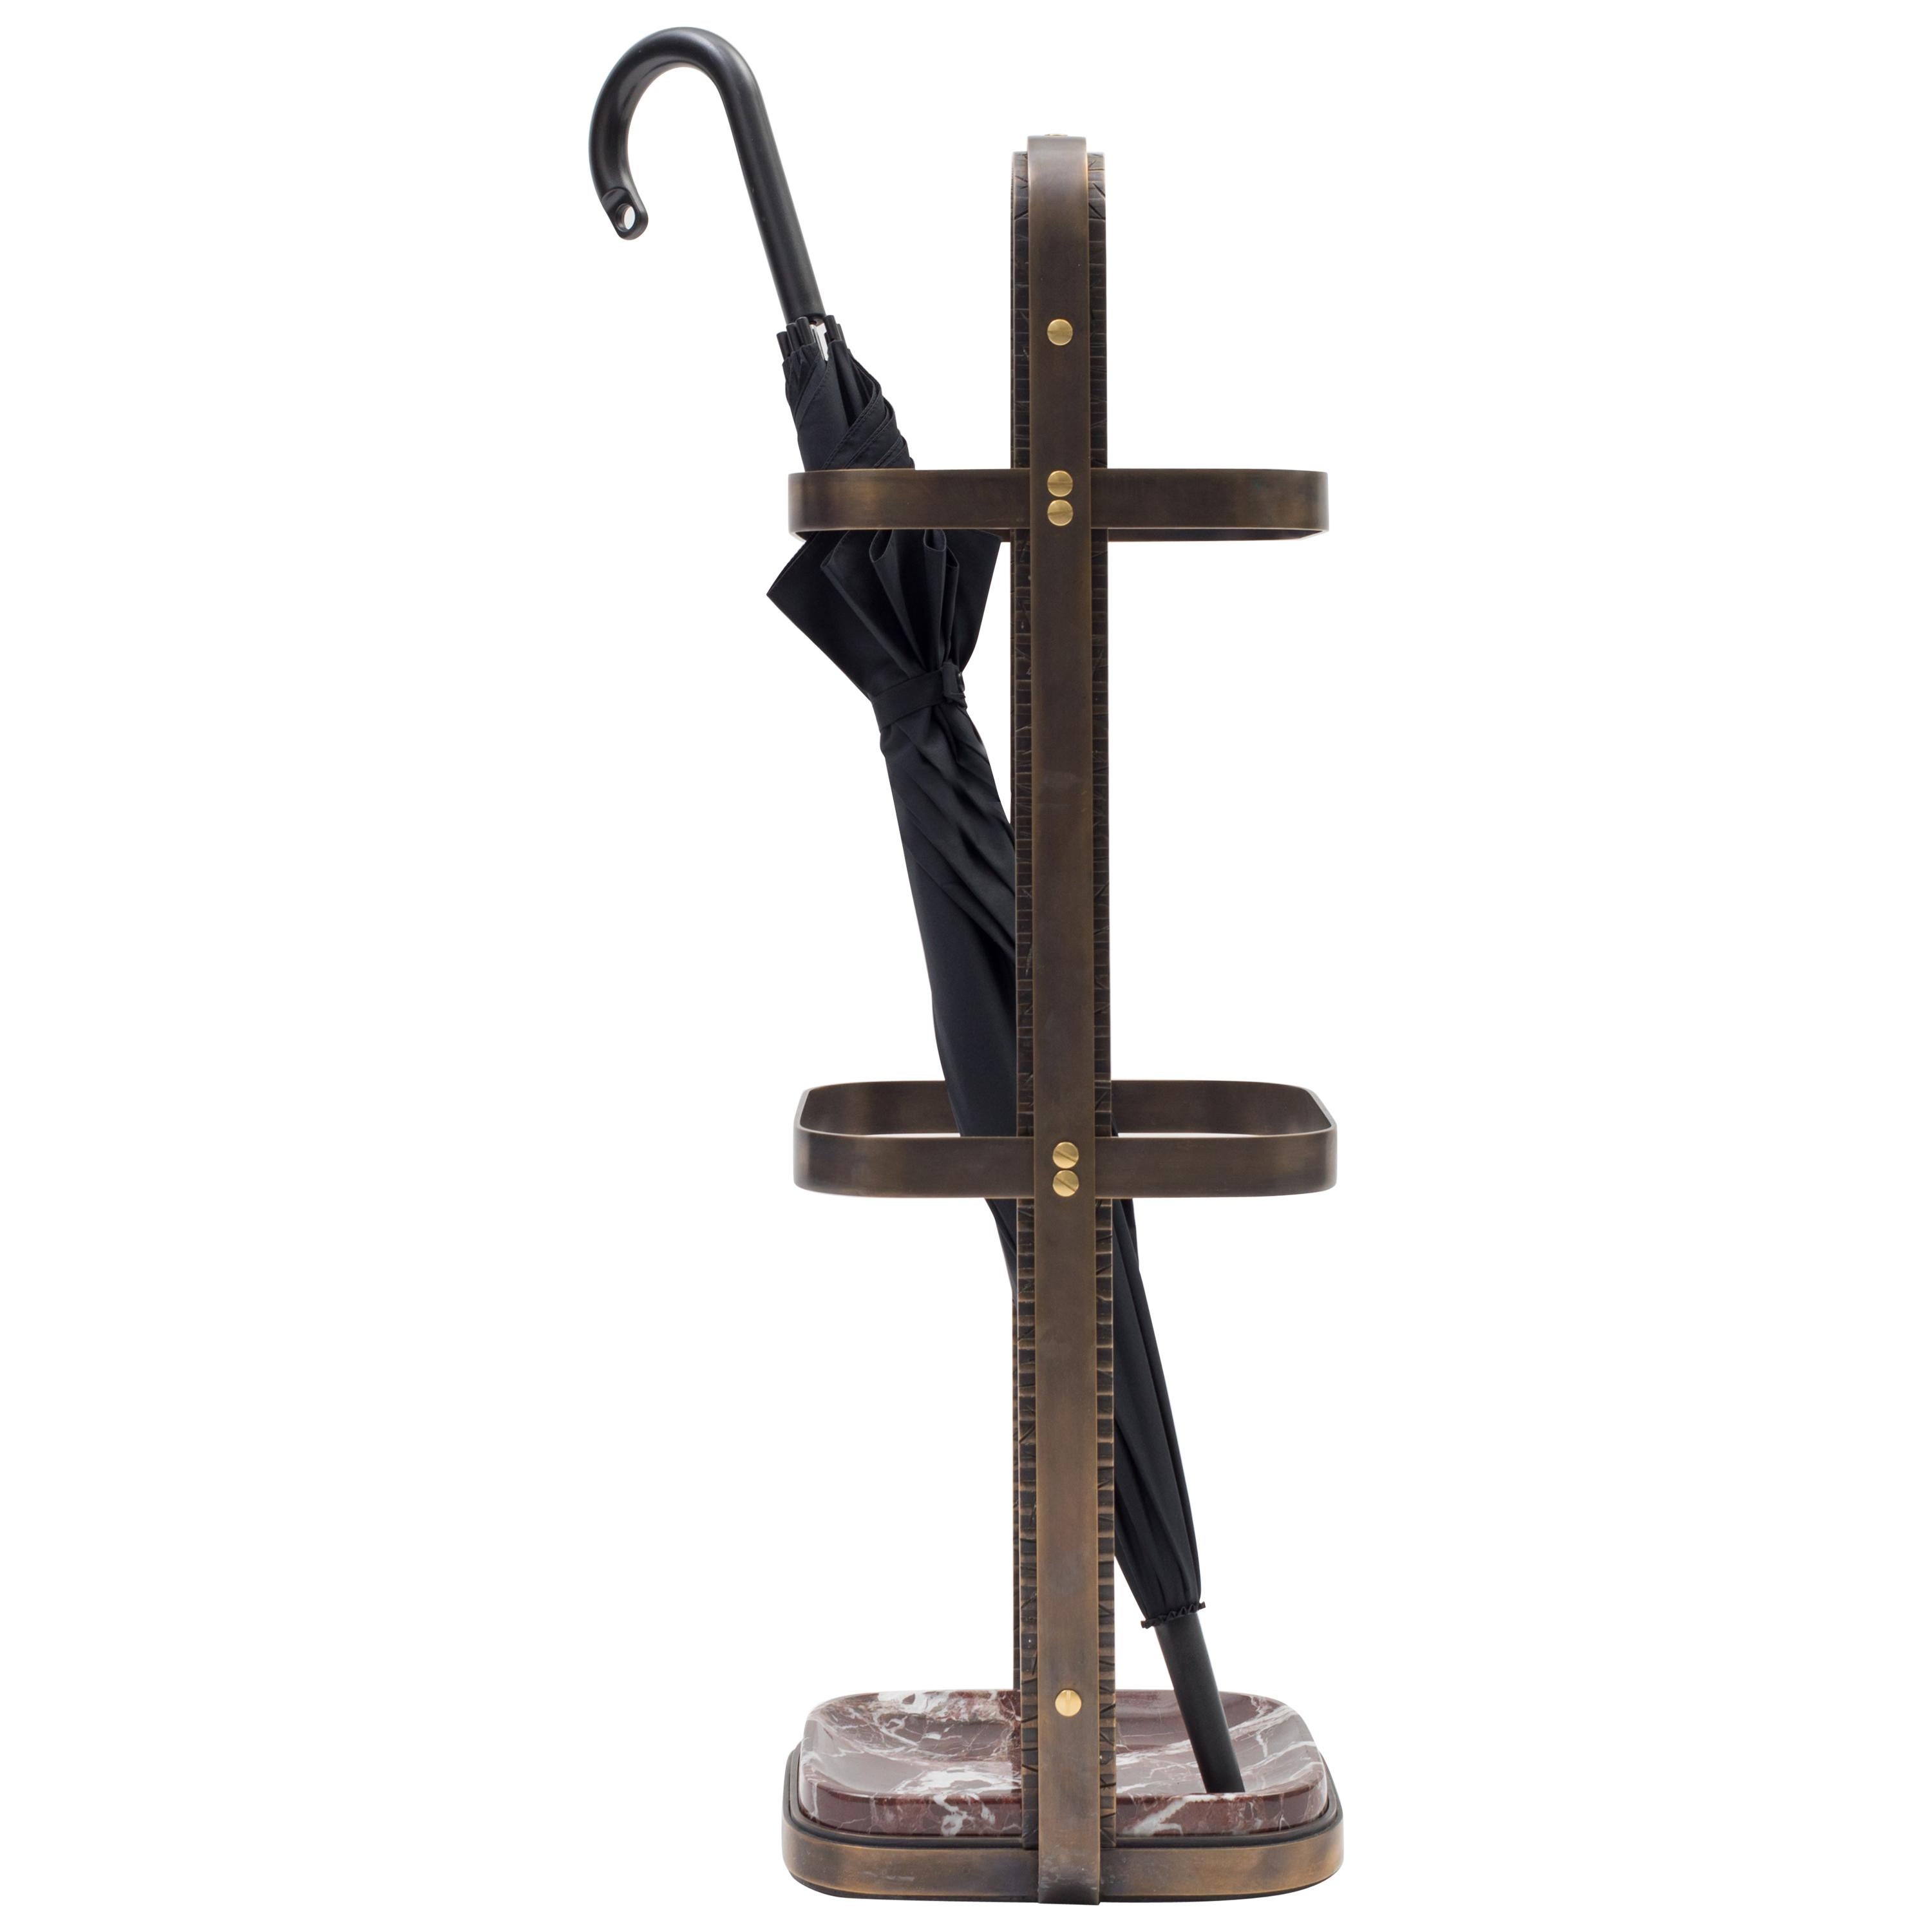 No. 1 Umbrella Stand - brass plated steel, polished Rosso Levanto marble